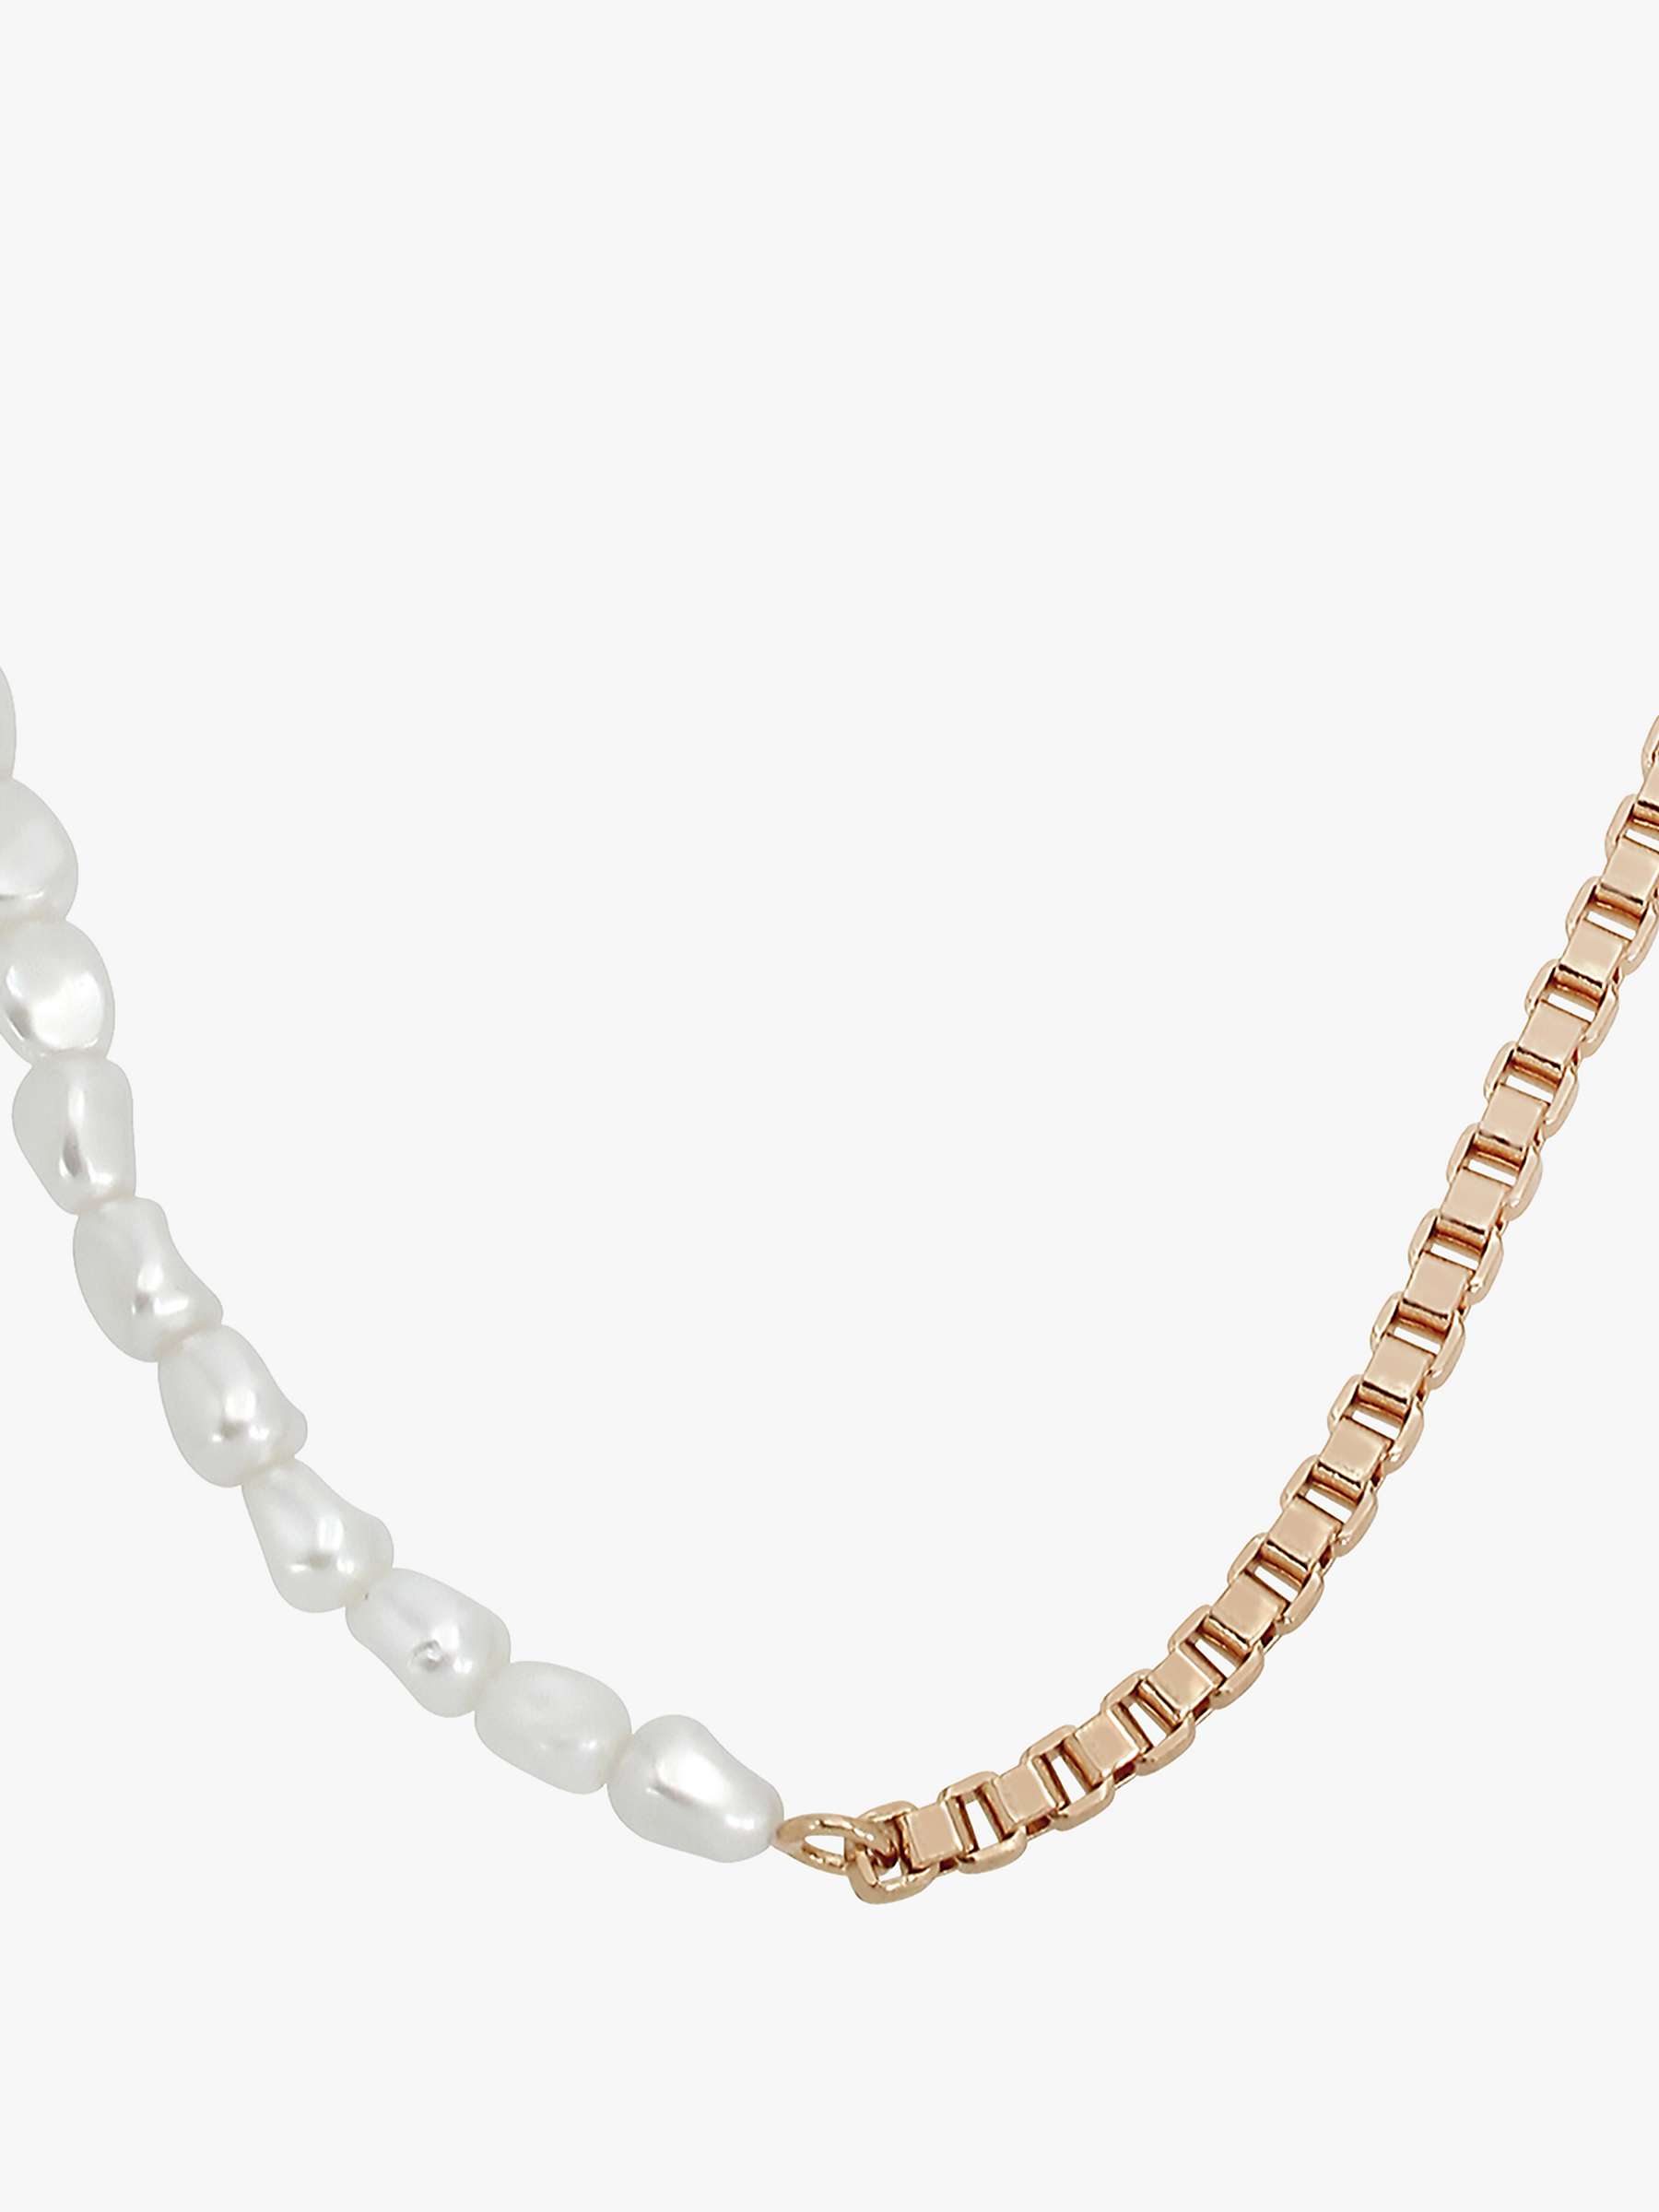 Buy AllSaints Curb Chain and Glass Bead Collar Necklace, Gold Online at johnlewis.com